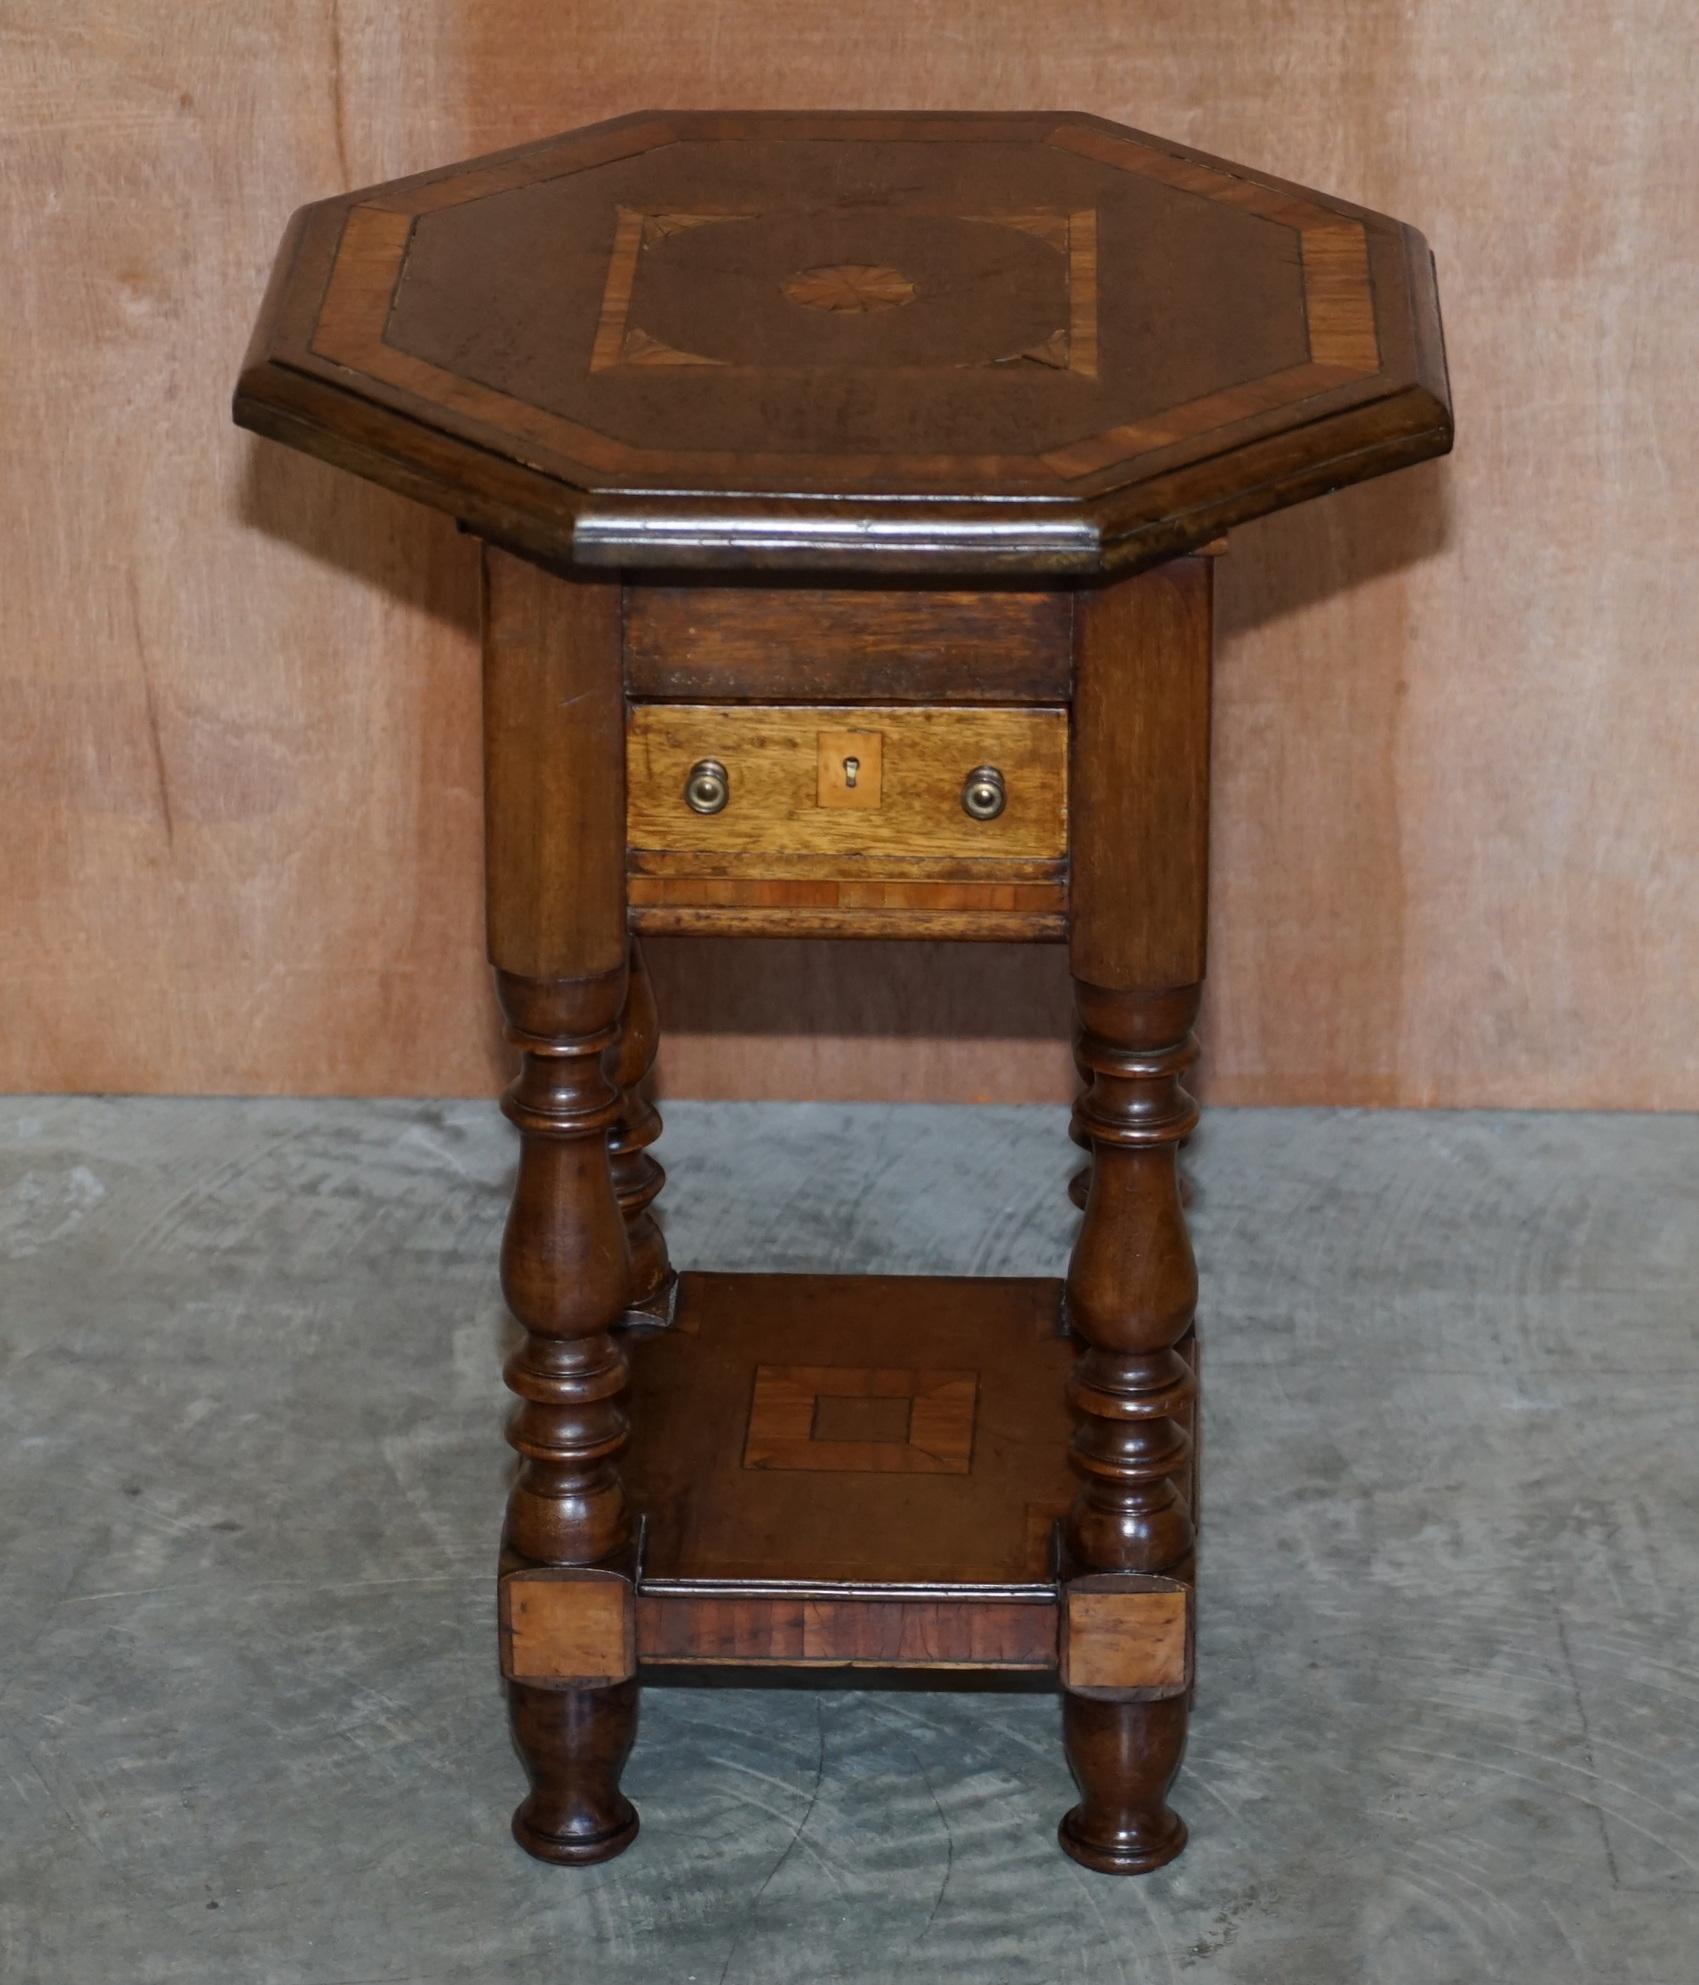 Royal House Antiques

Royal House Antiques is delighted to offer for sale this lovely hand made Victorian Mahogany and Walnut side lamp wine table with Sheraton revival inlaid top

Please note the delivery fee listed is just a guide, it covers